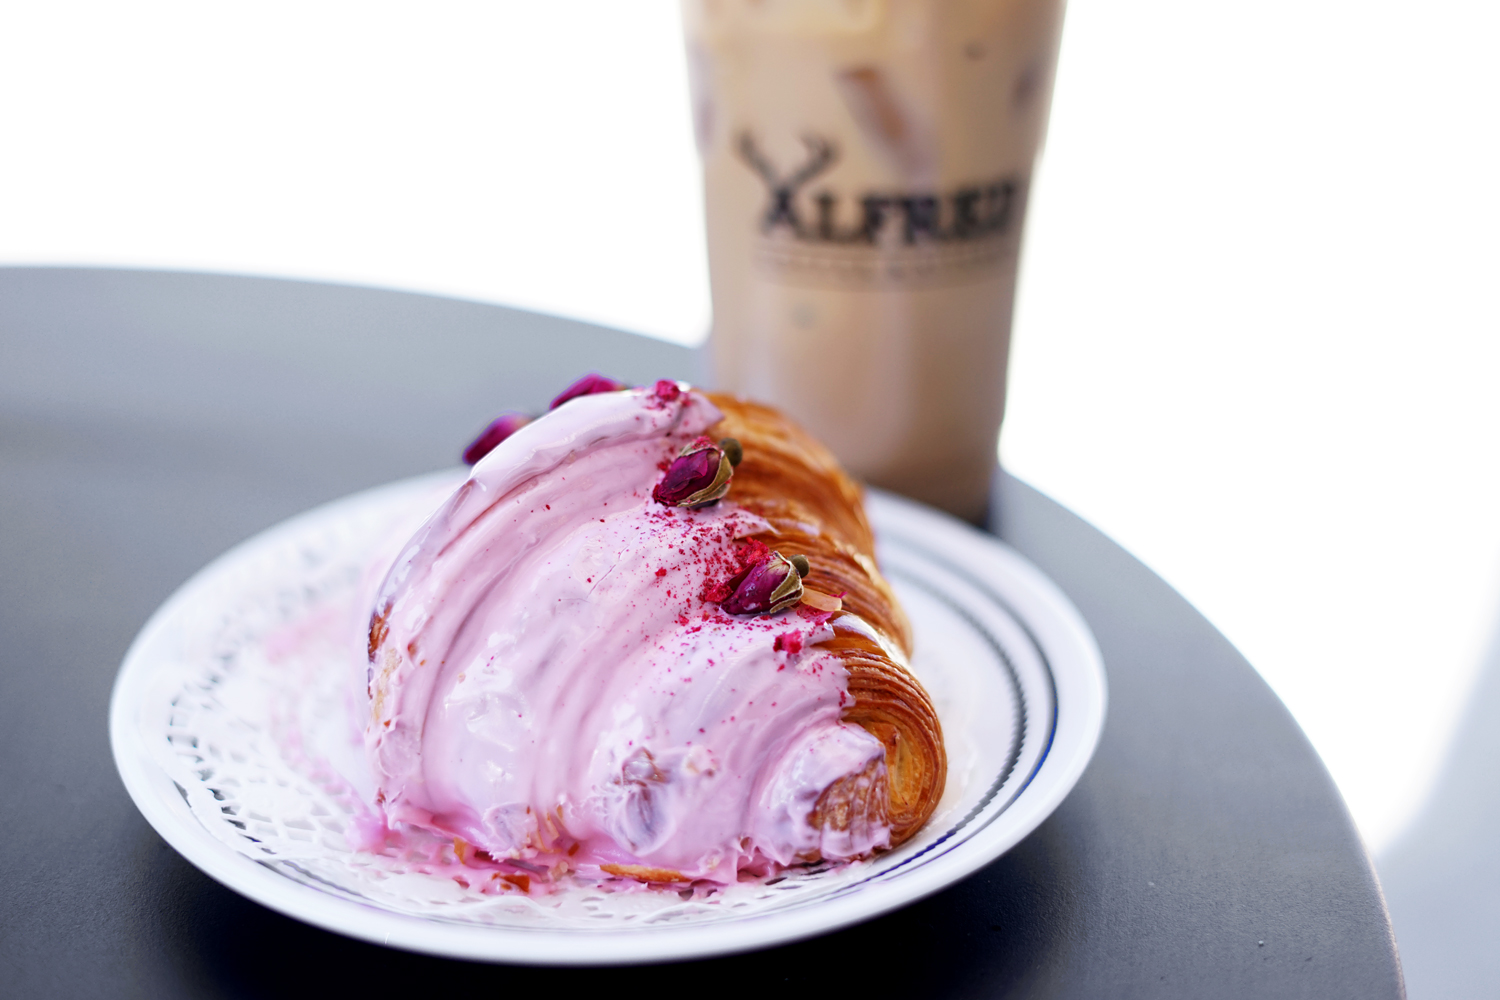 02alfred-coffee-beverlyhills-rose-croissant